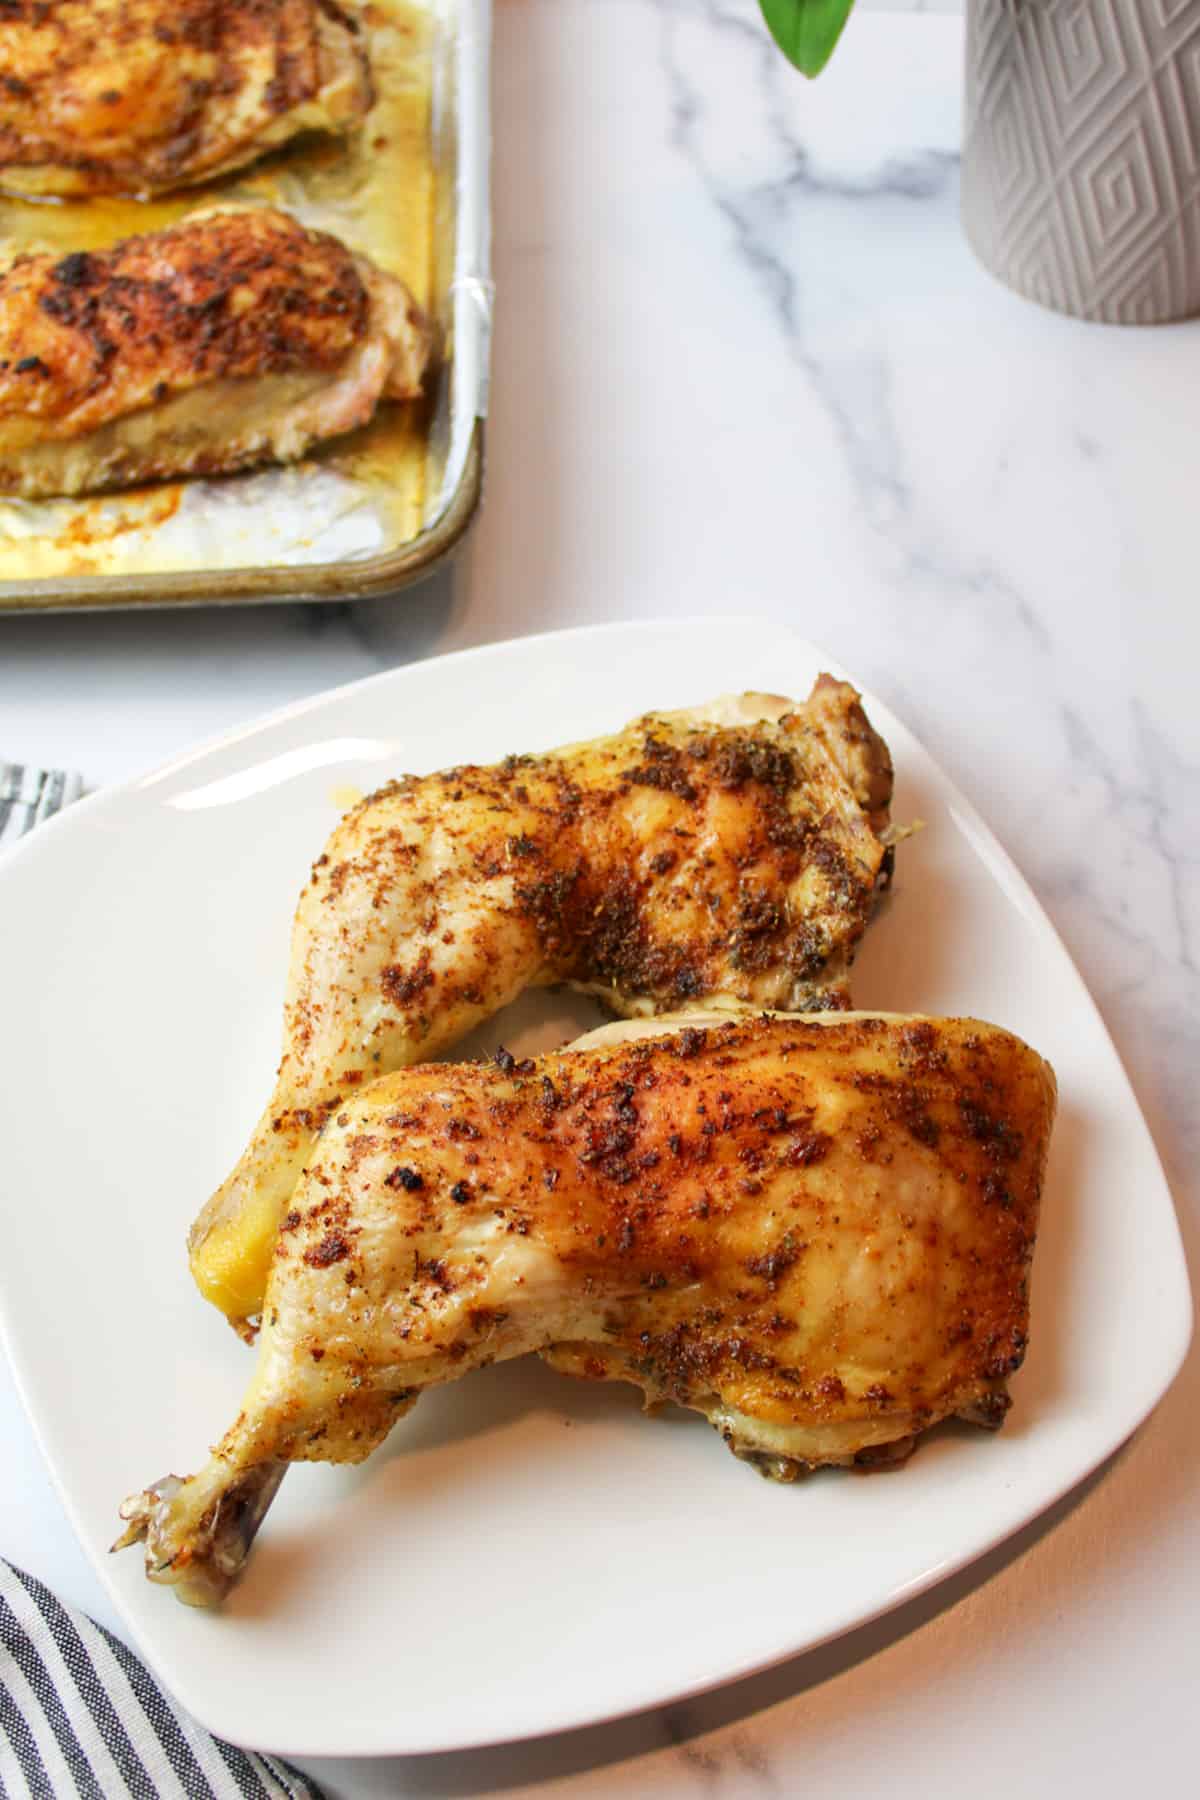 two crispy baked chicken quarters on a plate with more on a baking sheet in background